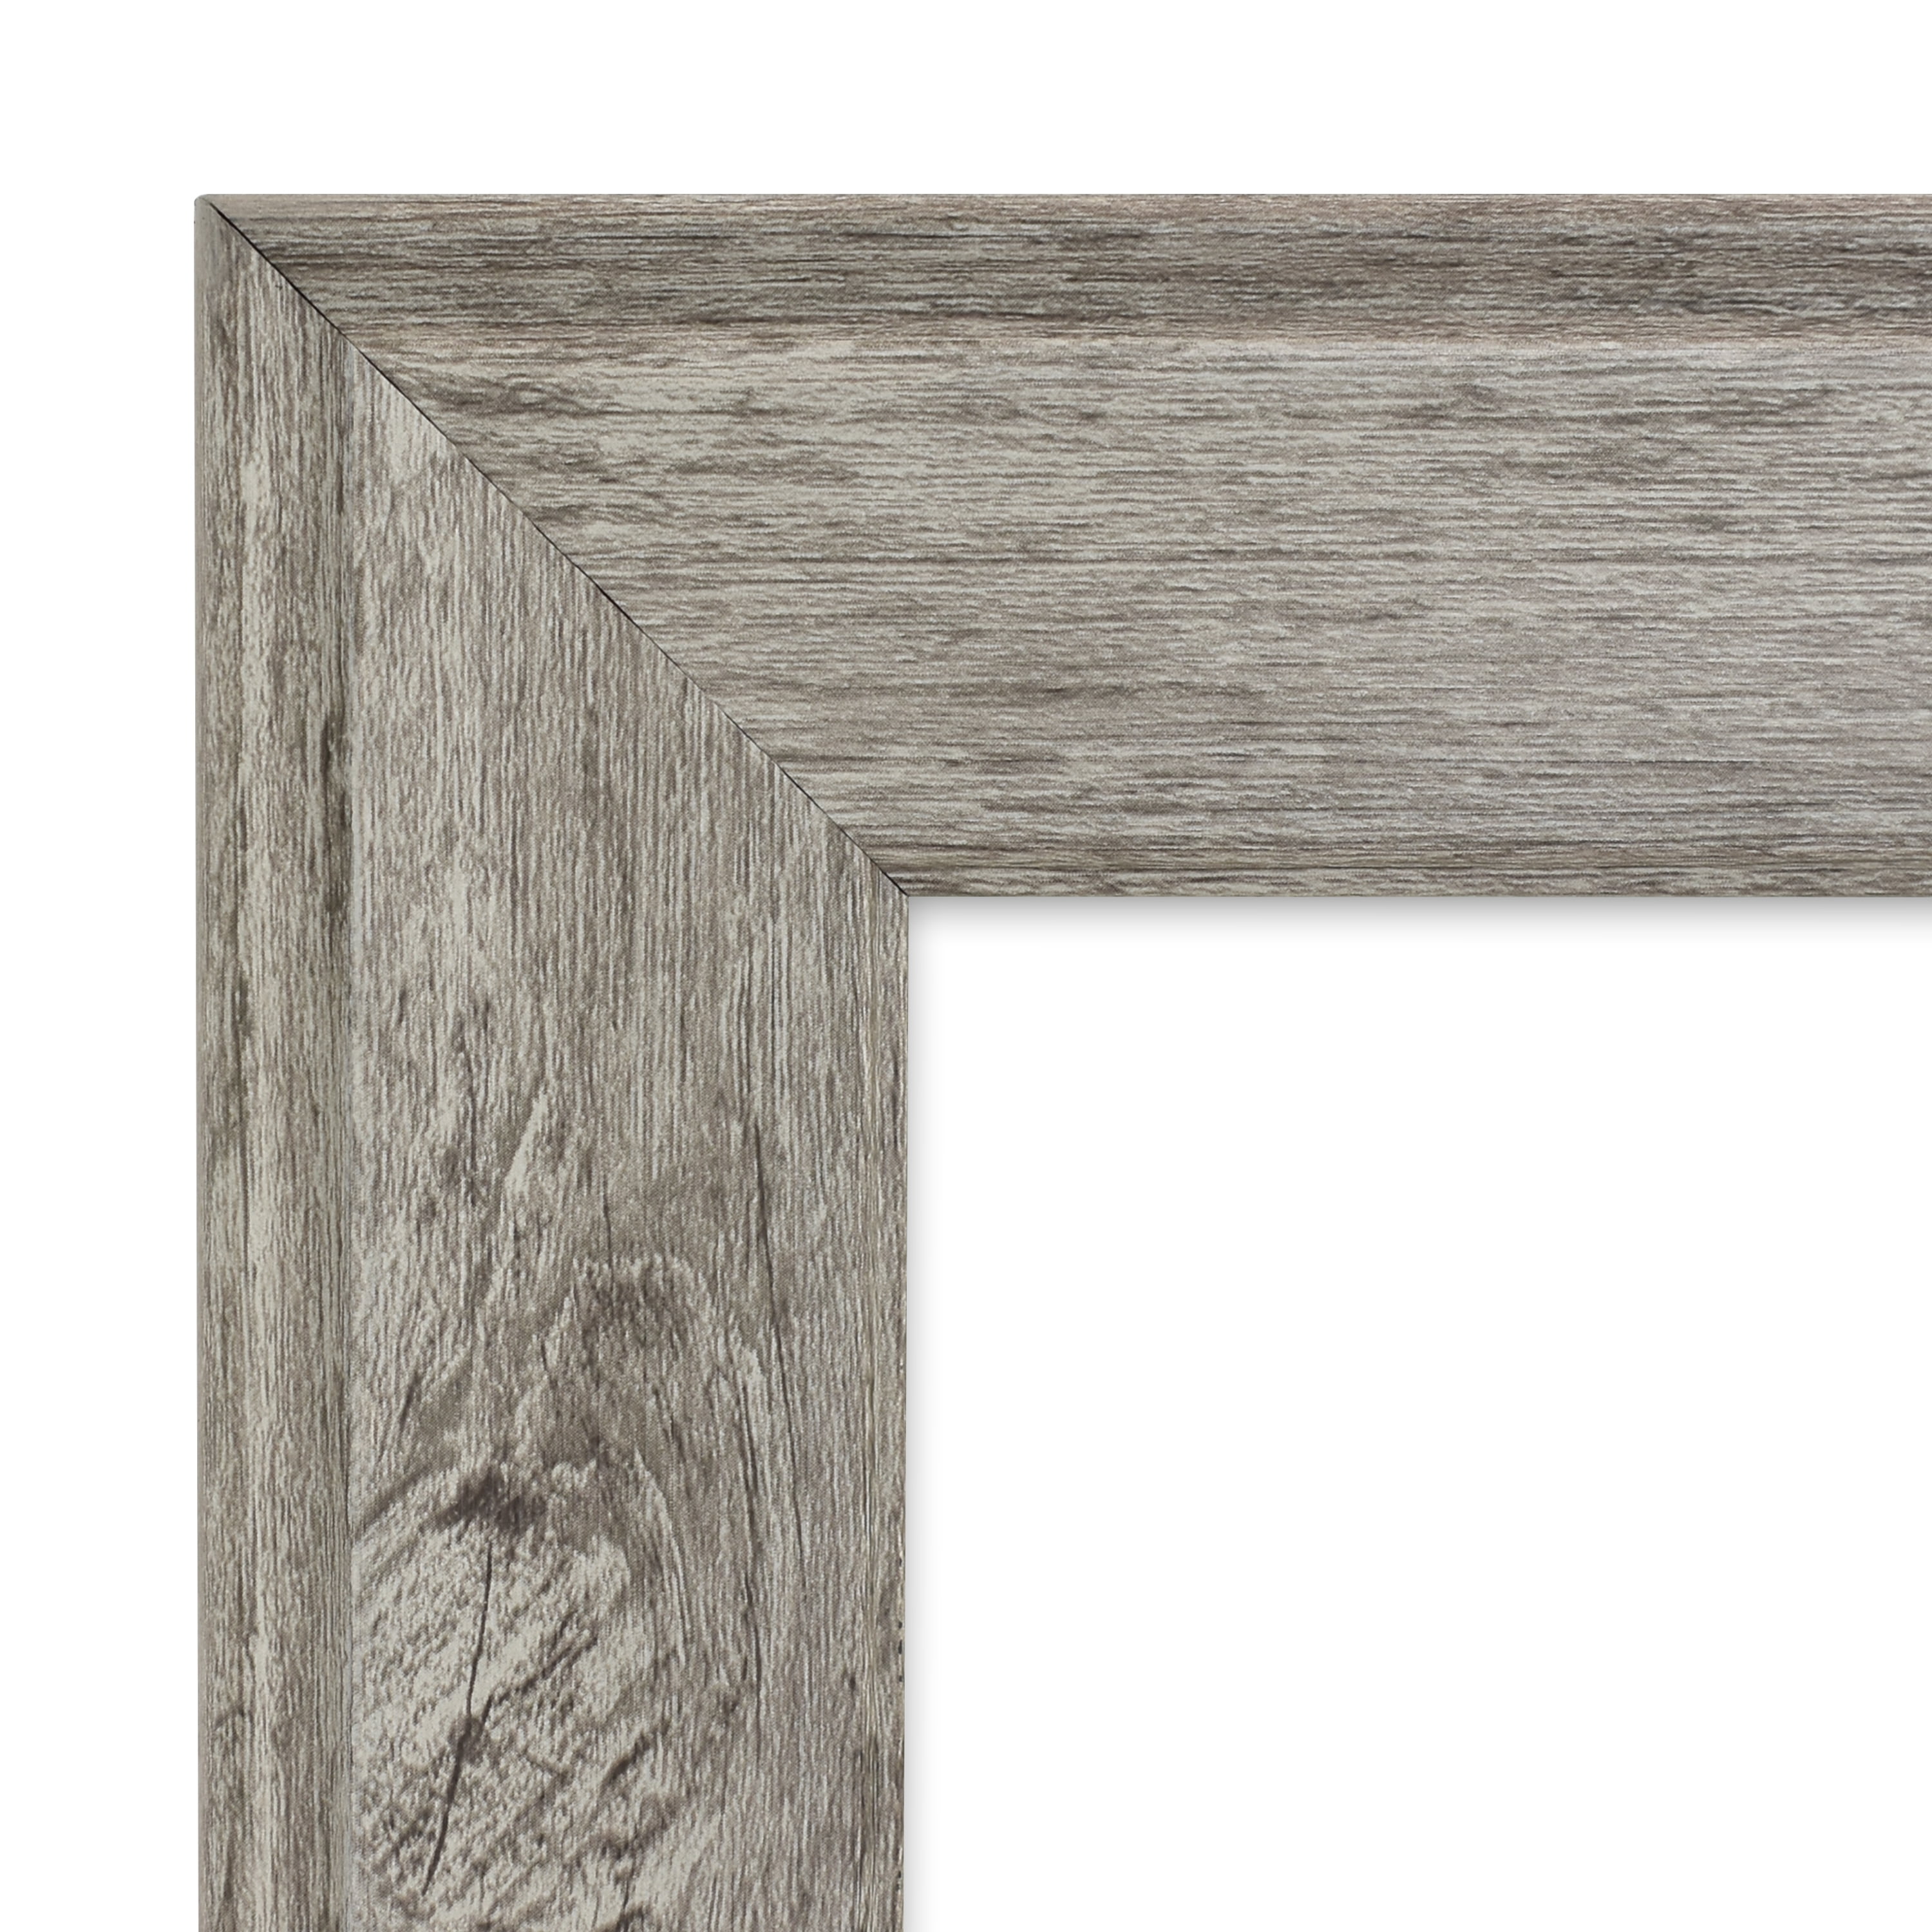  Giftgarden 4x6 Picture Frame Distressed Grey, 4 by 6 Rustic  Wood-grain Gray Photo Frames Bulk for Wall or Tabletop, 12 Pack